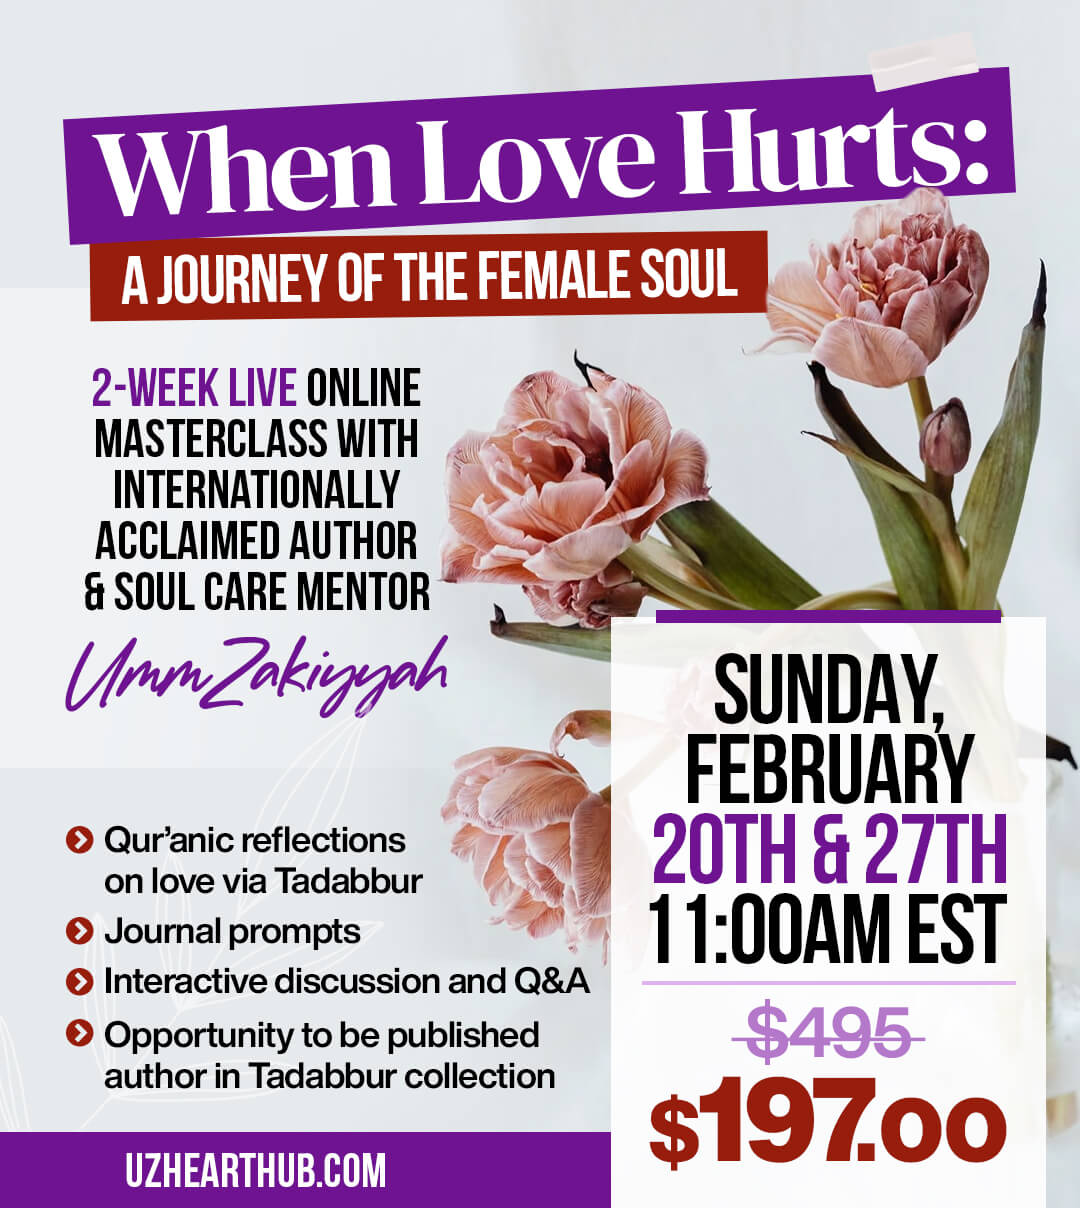 When Love Hurts: Journey of the Female Soul flier